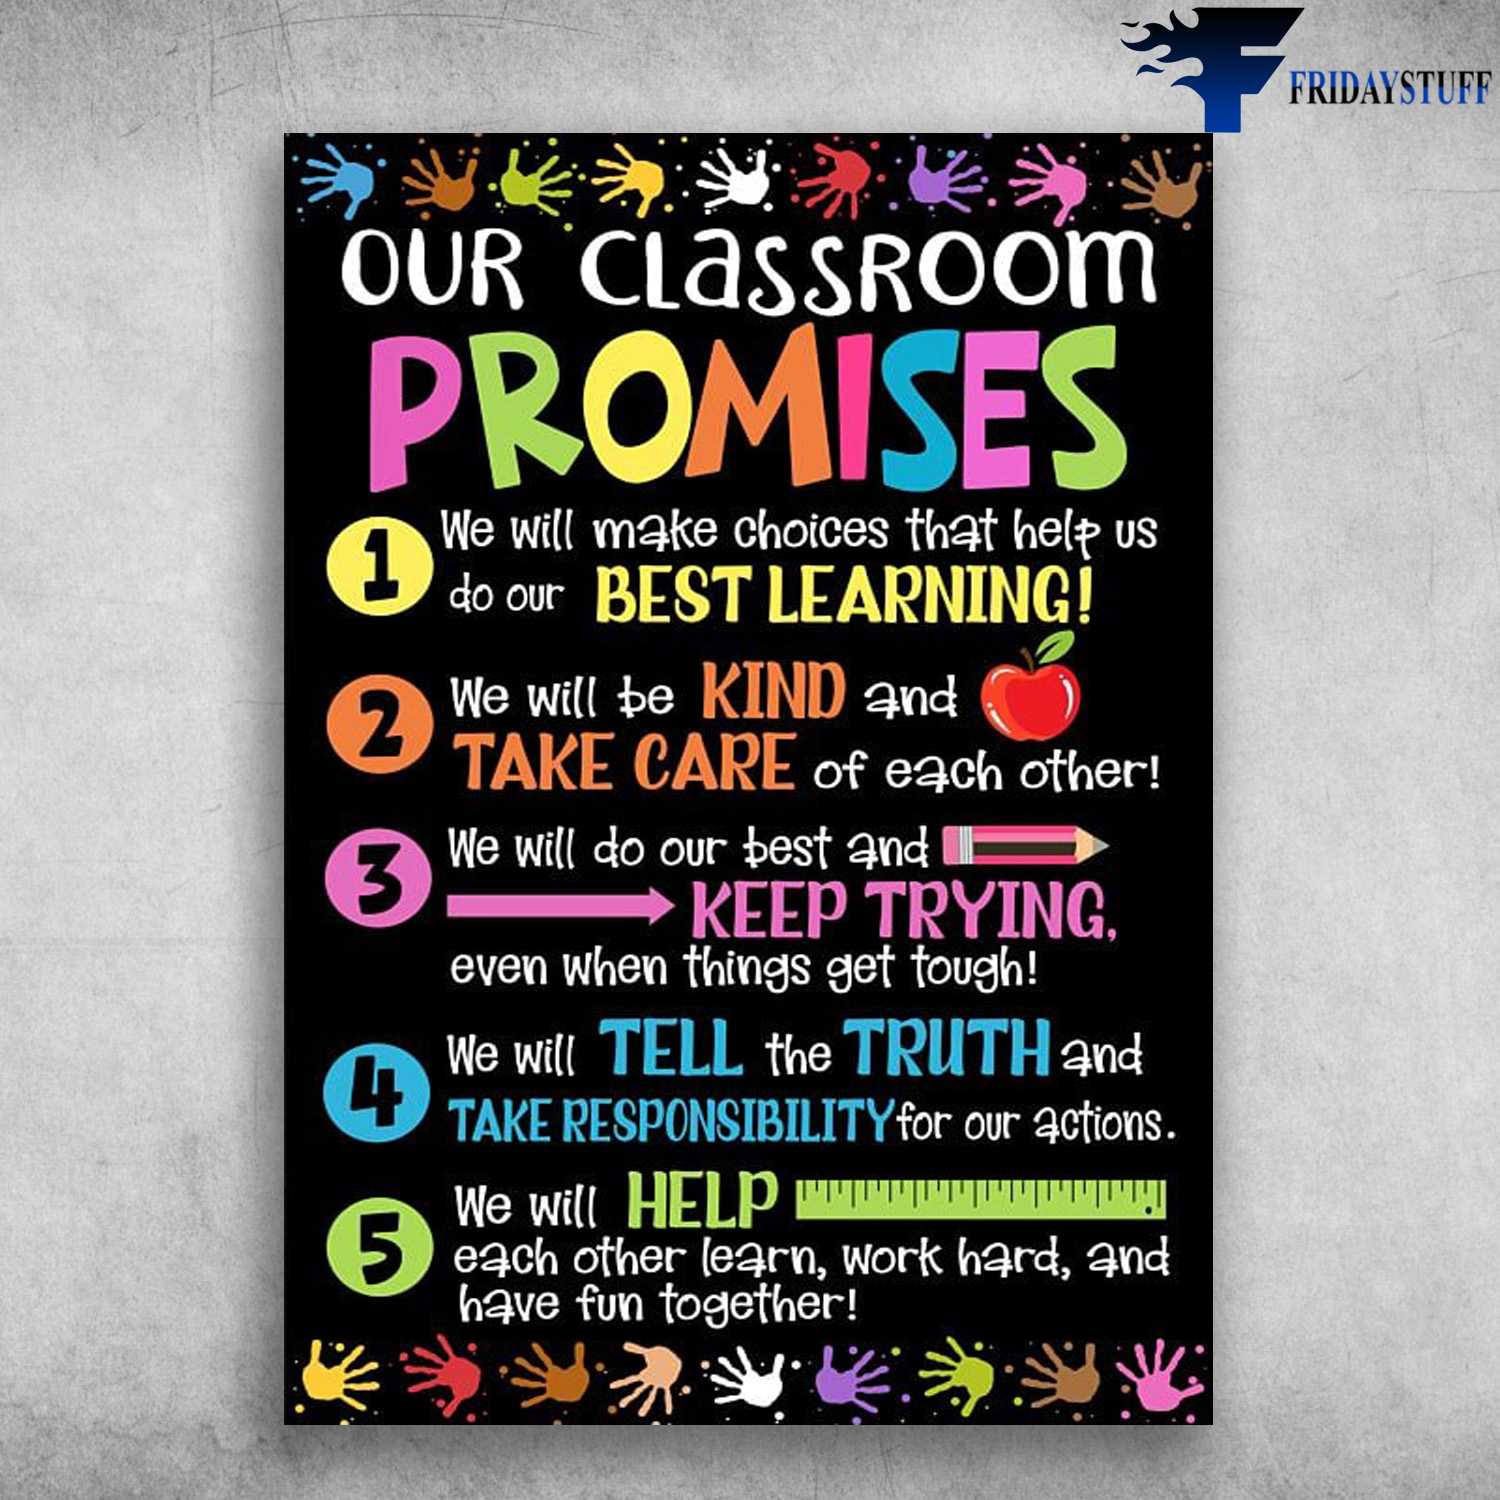 Back To School - Our Classroom Promises, We Will Make Choices That Help Us, Do Our Best Learning, We Will Be Kind And Take Care Of Each Other, We Will Do Our Best And Keep Trying, Even When Things Get Tough